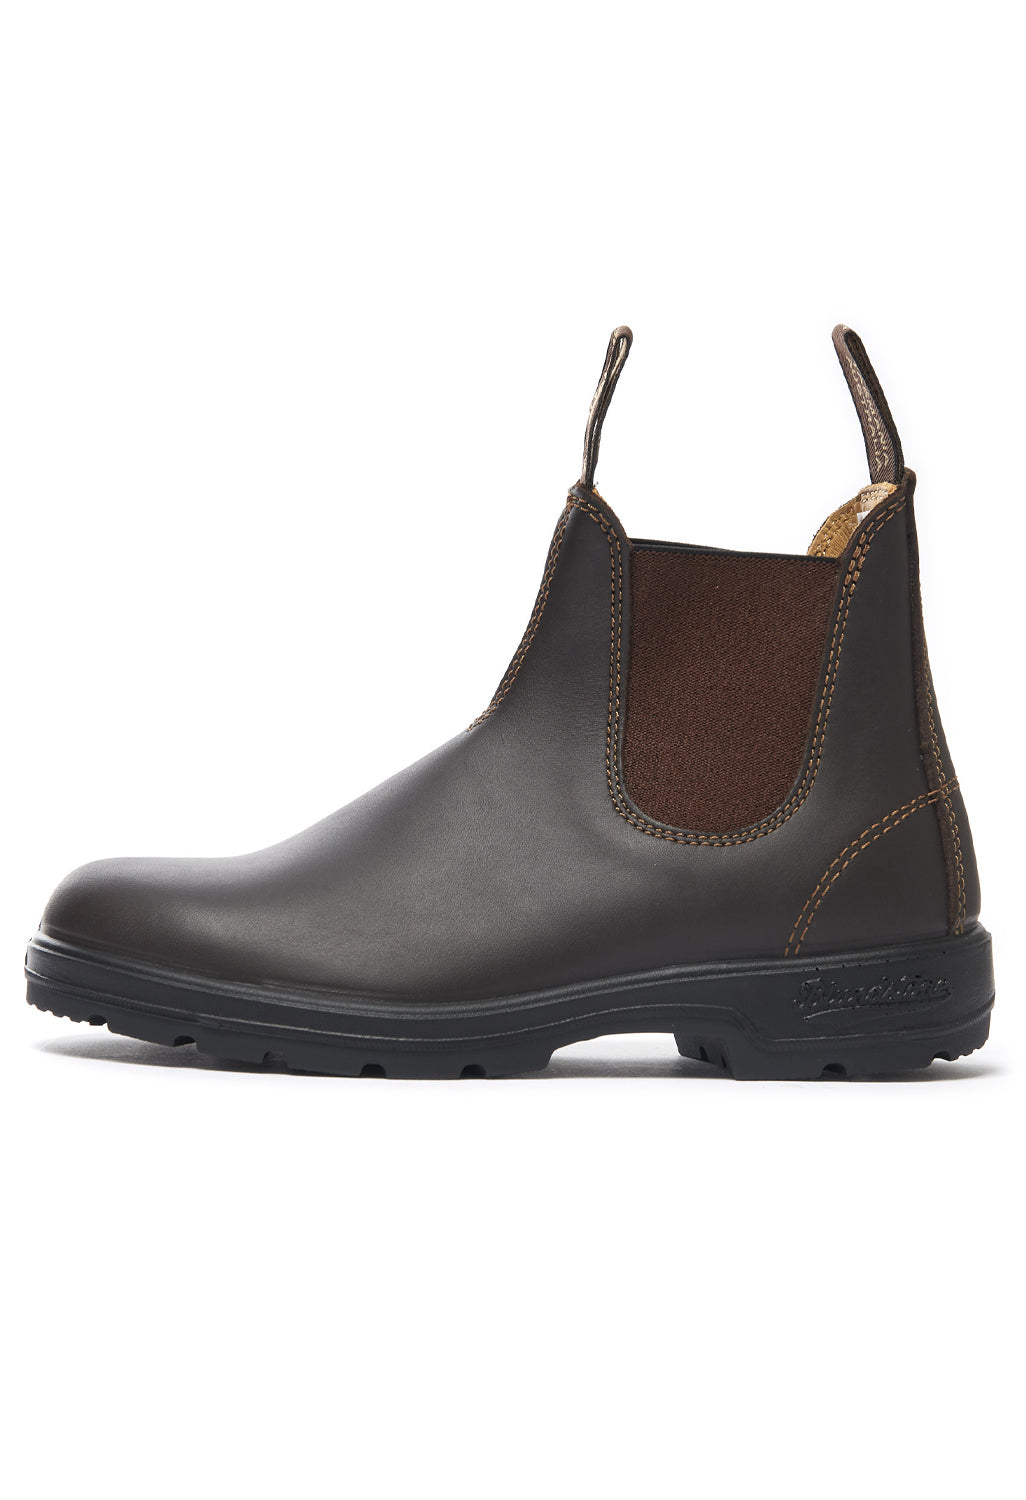 Blundstone 550 Boots 3